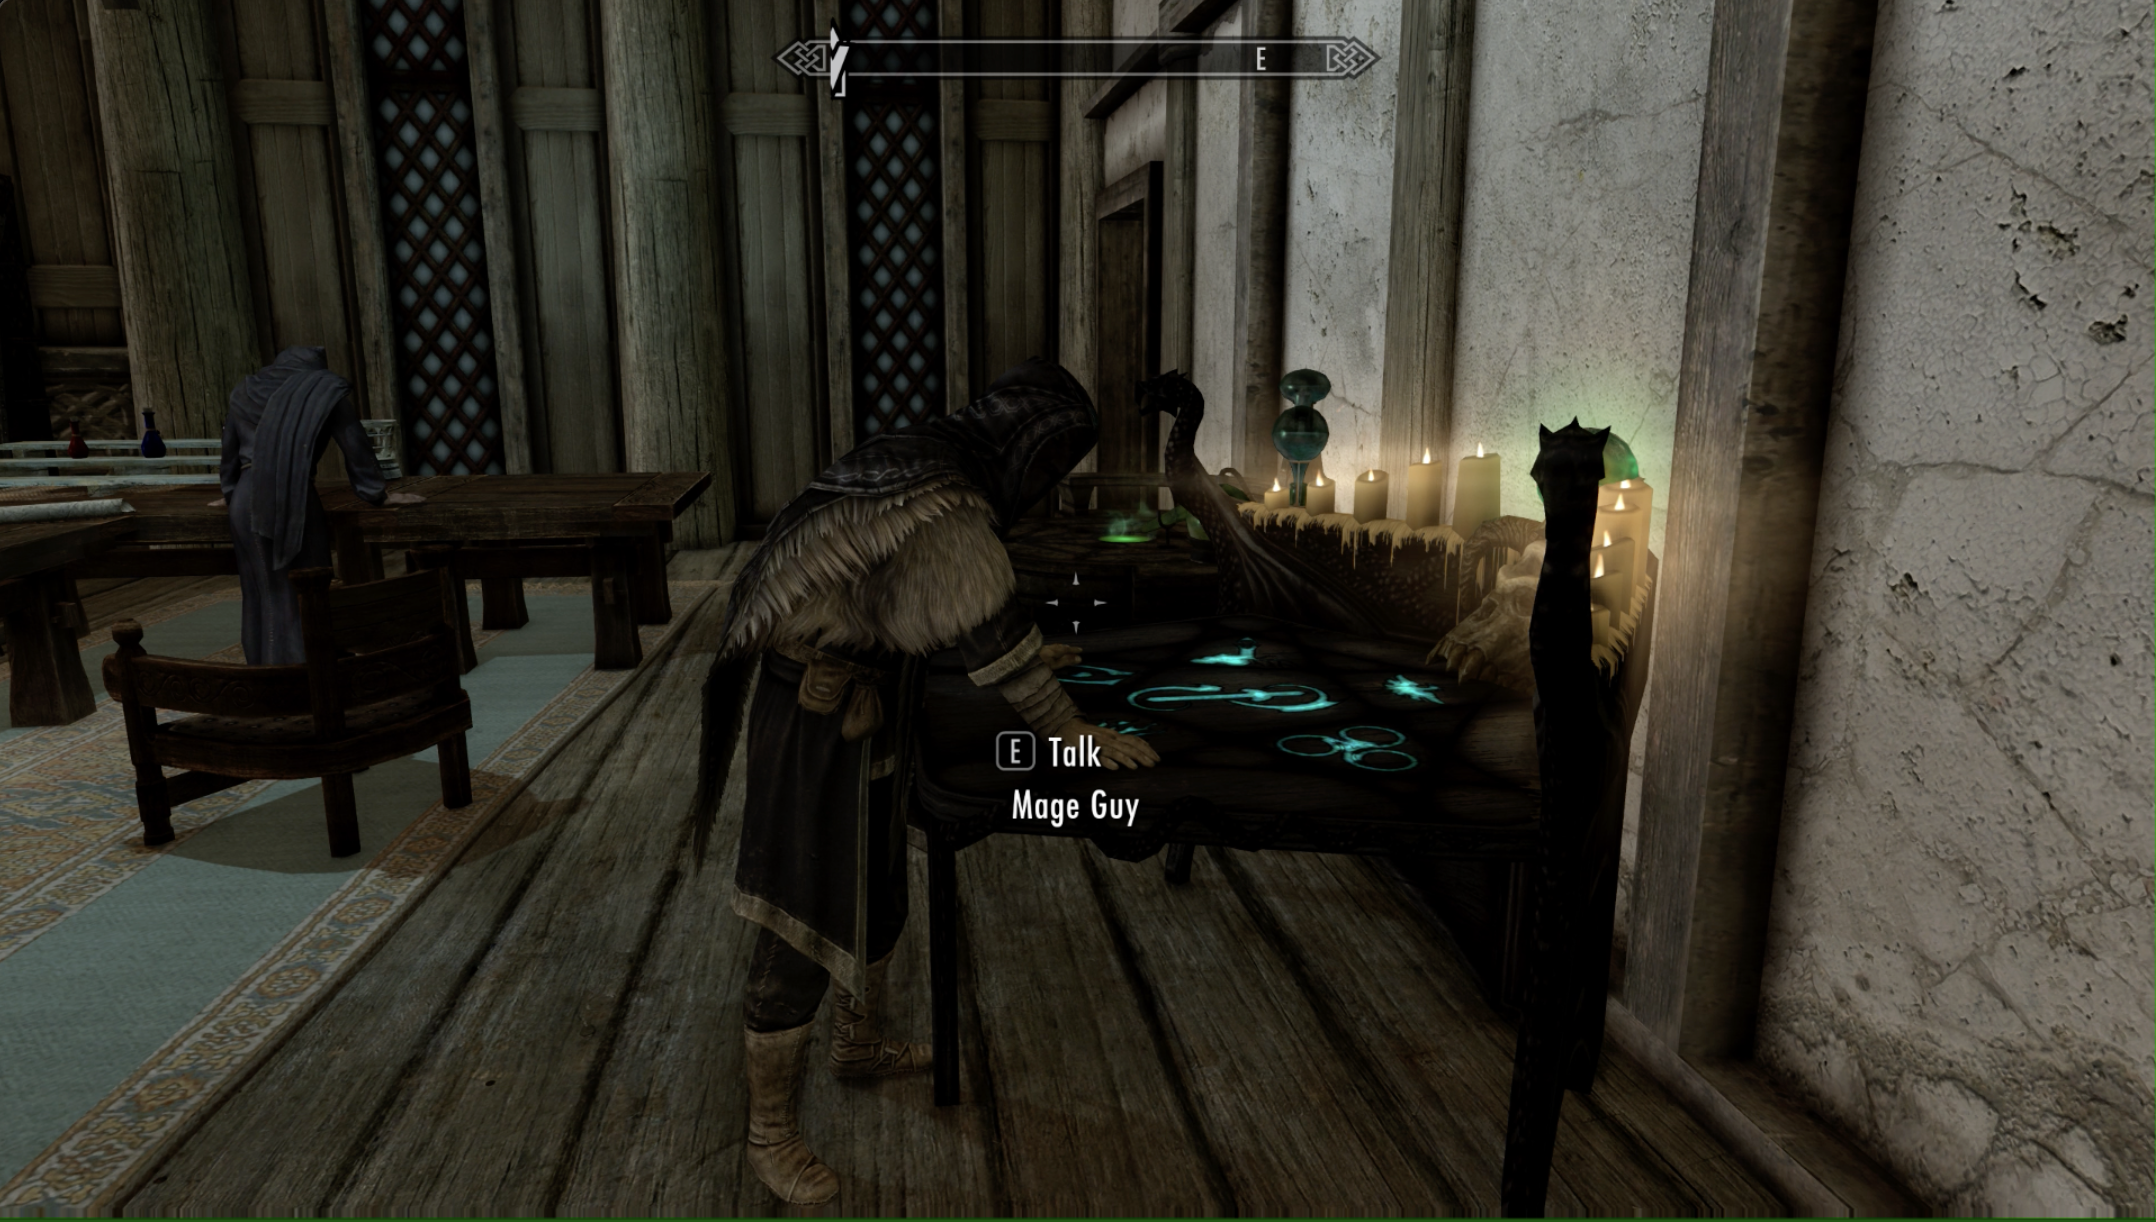 Mage Guy Follower leans against an enchanting table in Skyrim.